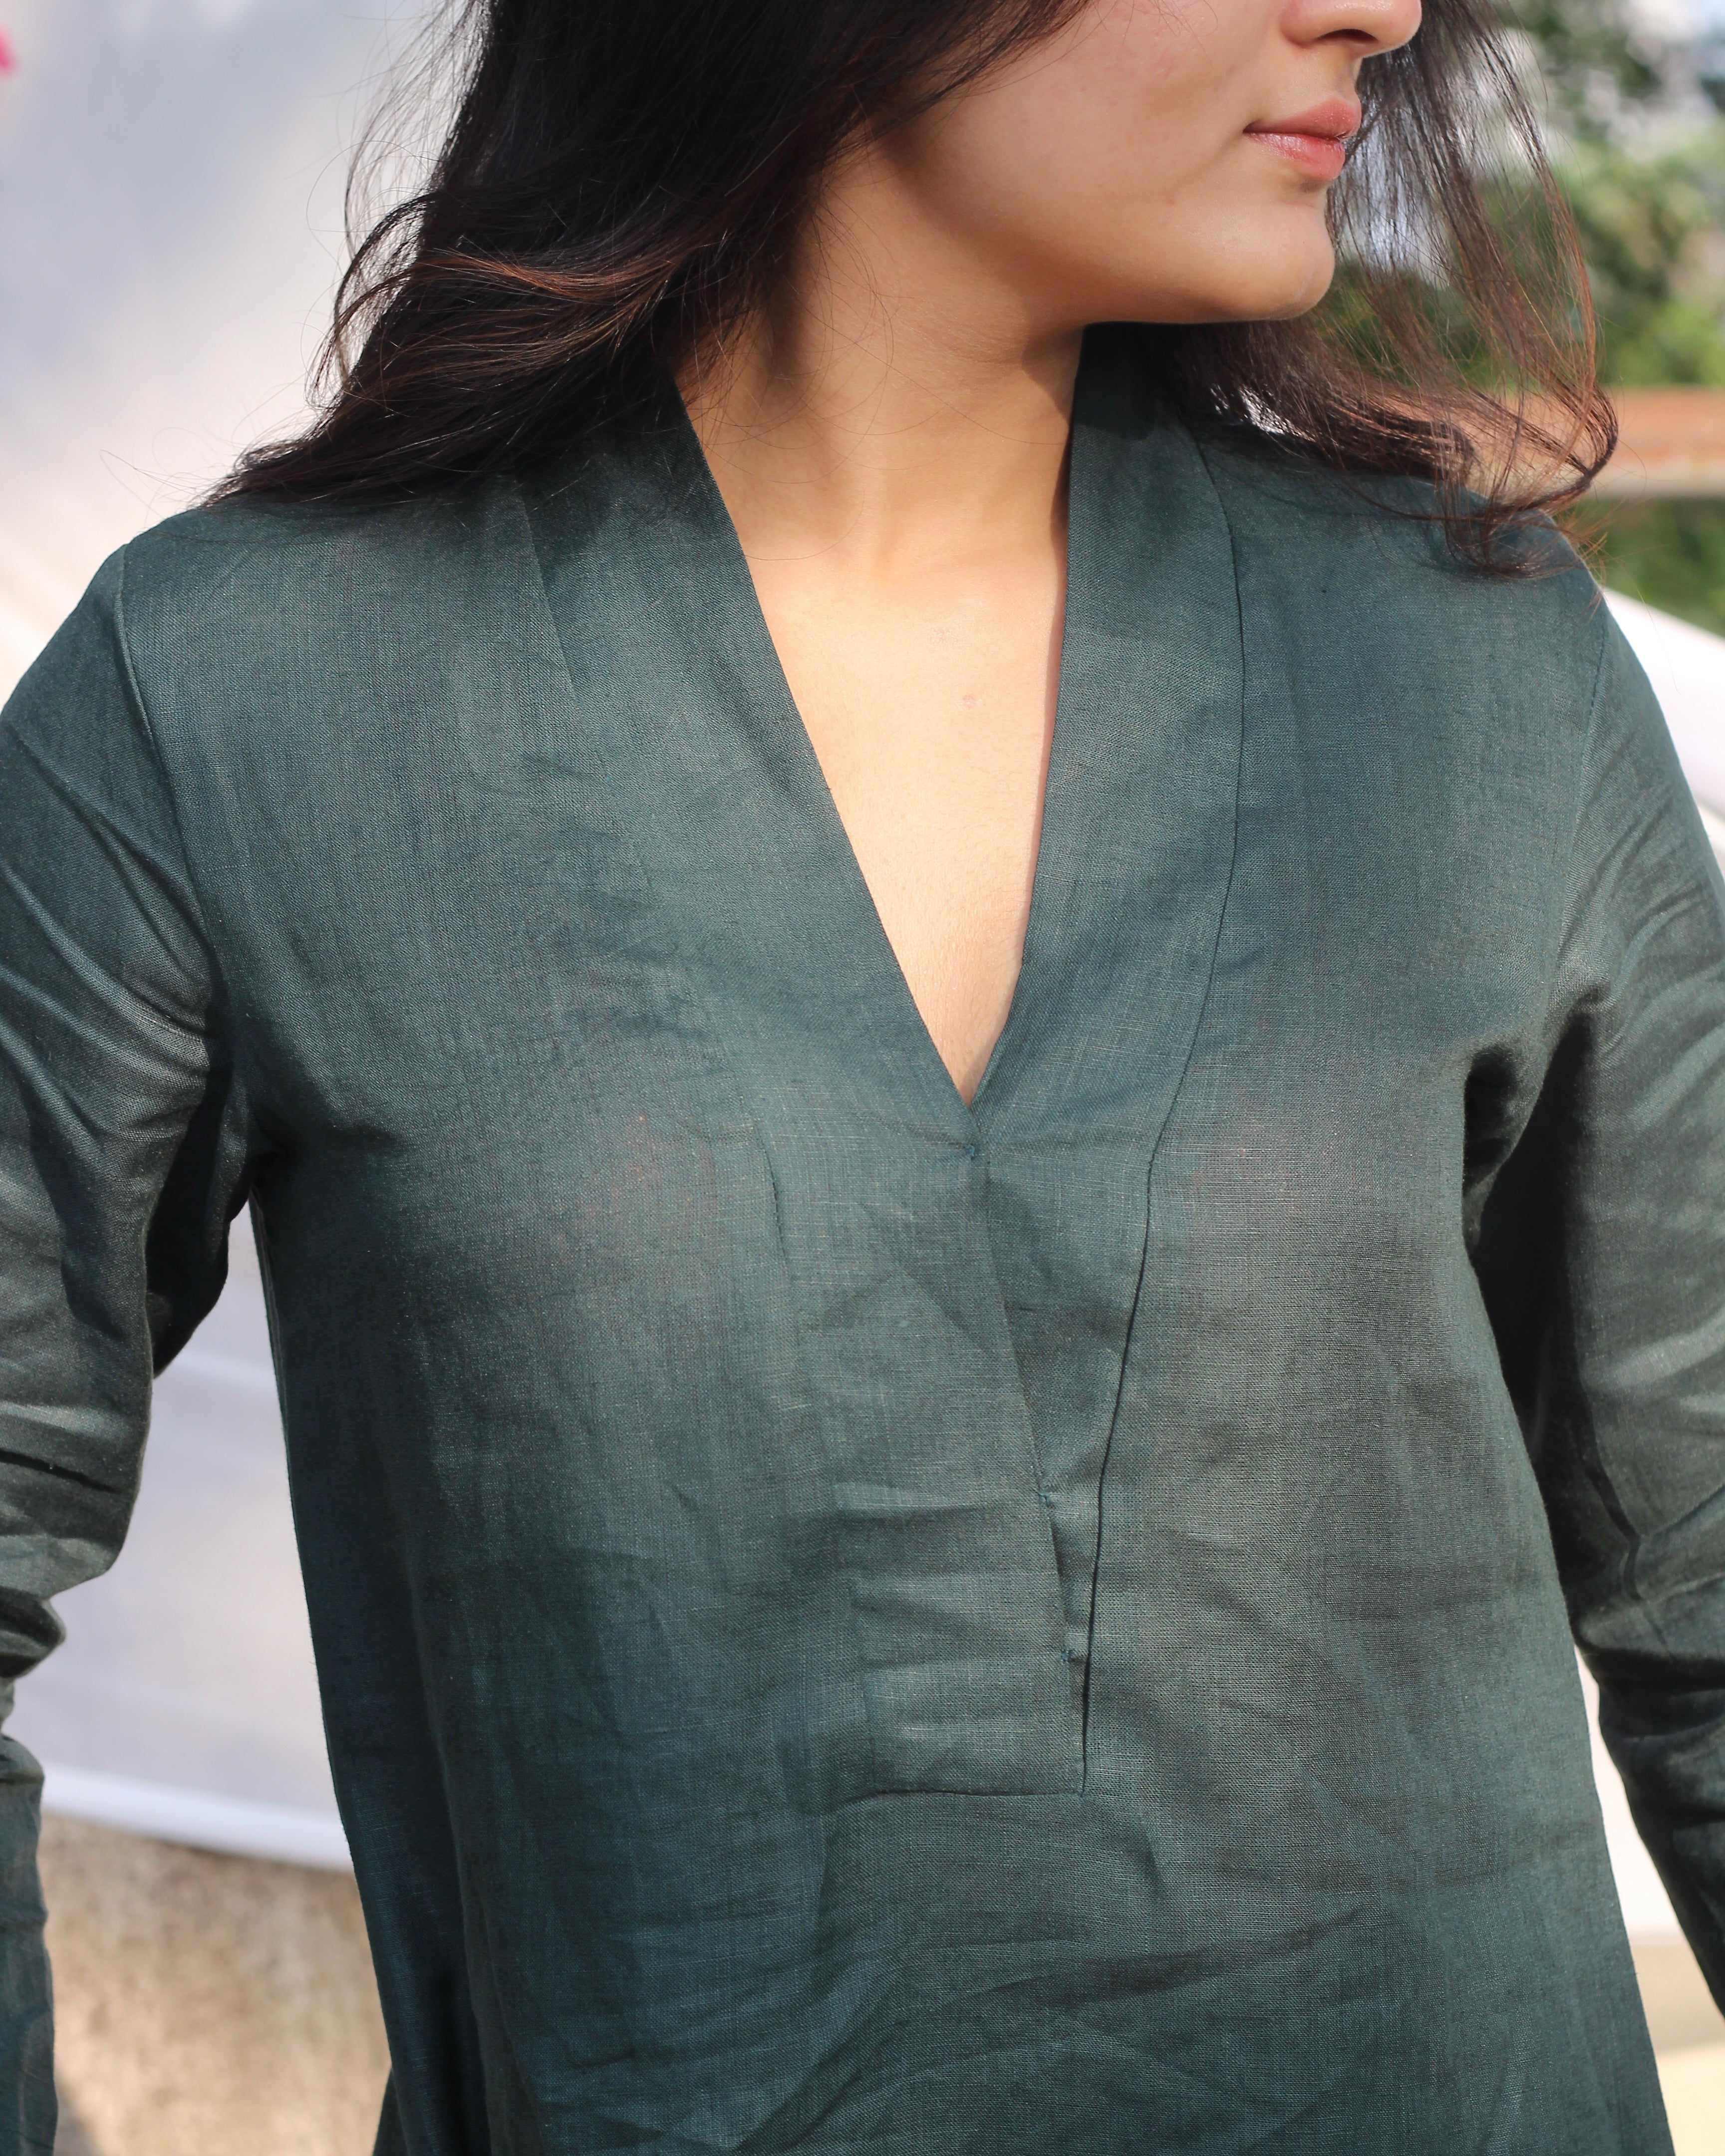 SAADGI Collection's Pure Linen Teal Co-ord Set with V-neck kurta, pockets, 3/4 sleeves, perfect for an elegant festive look